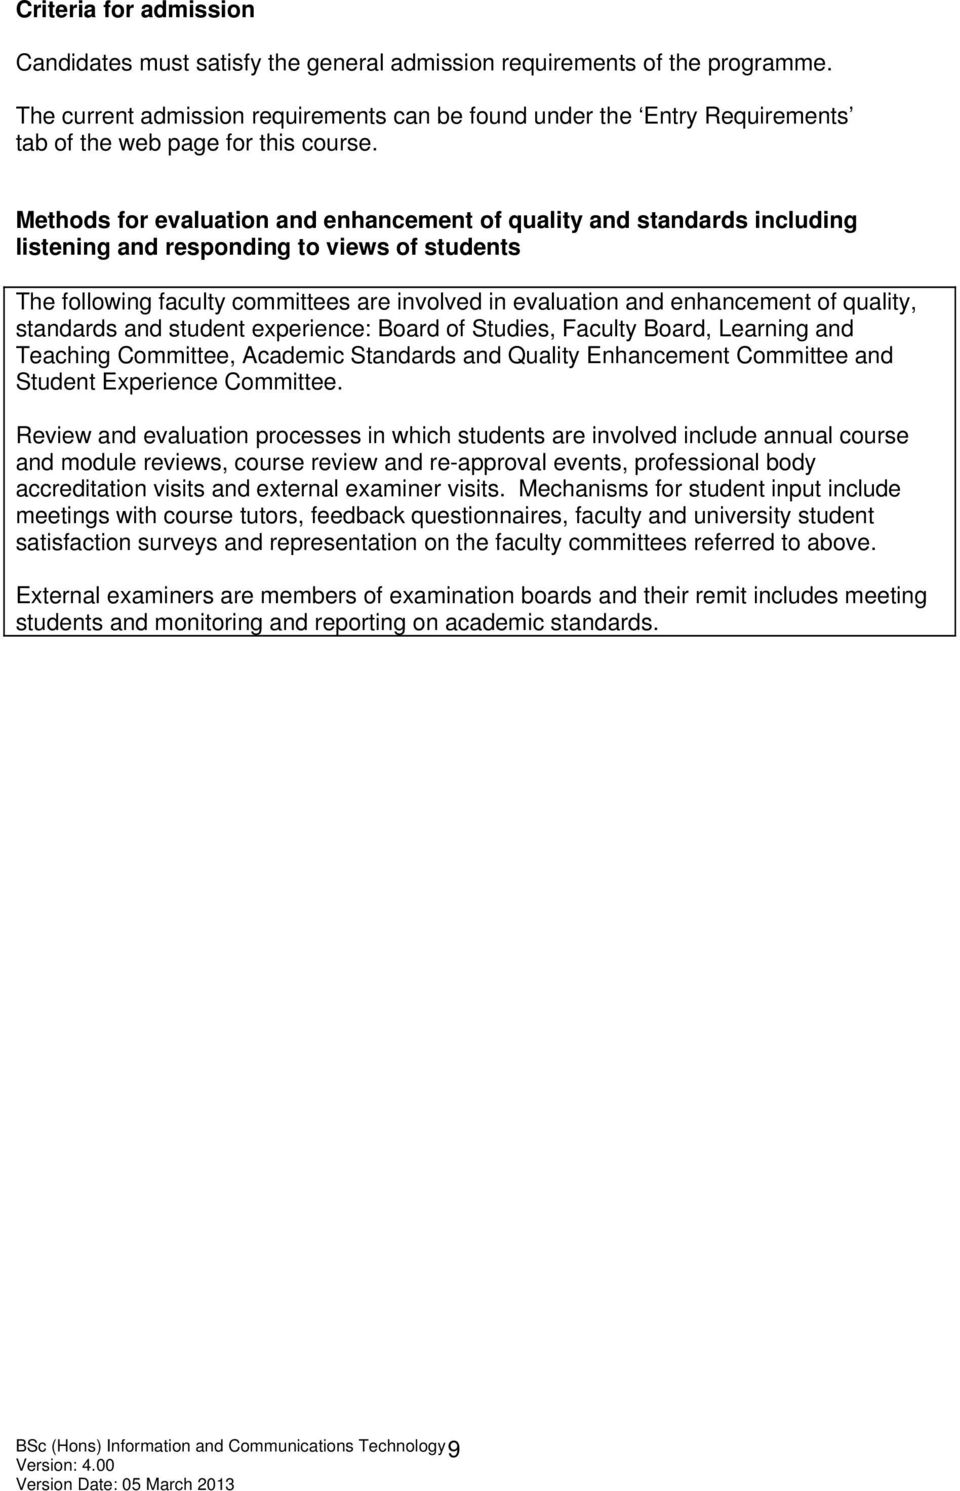 Methods for evaluation and enhancement of quality and standards including listening and responding to views of students The following faculty committees are involved in evaluation and enhancement of